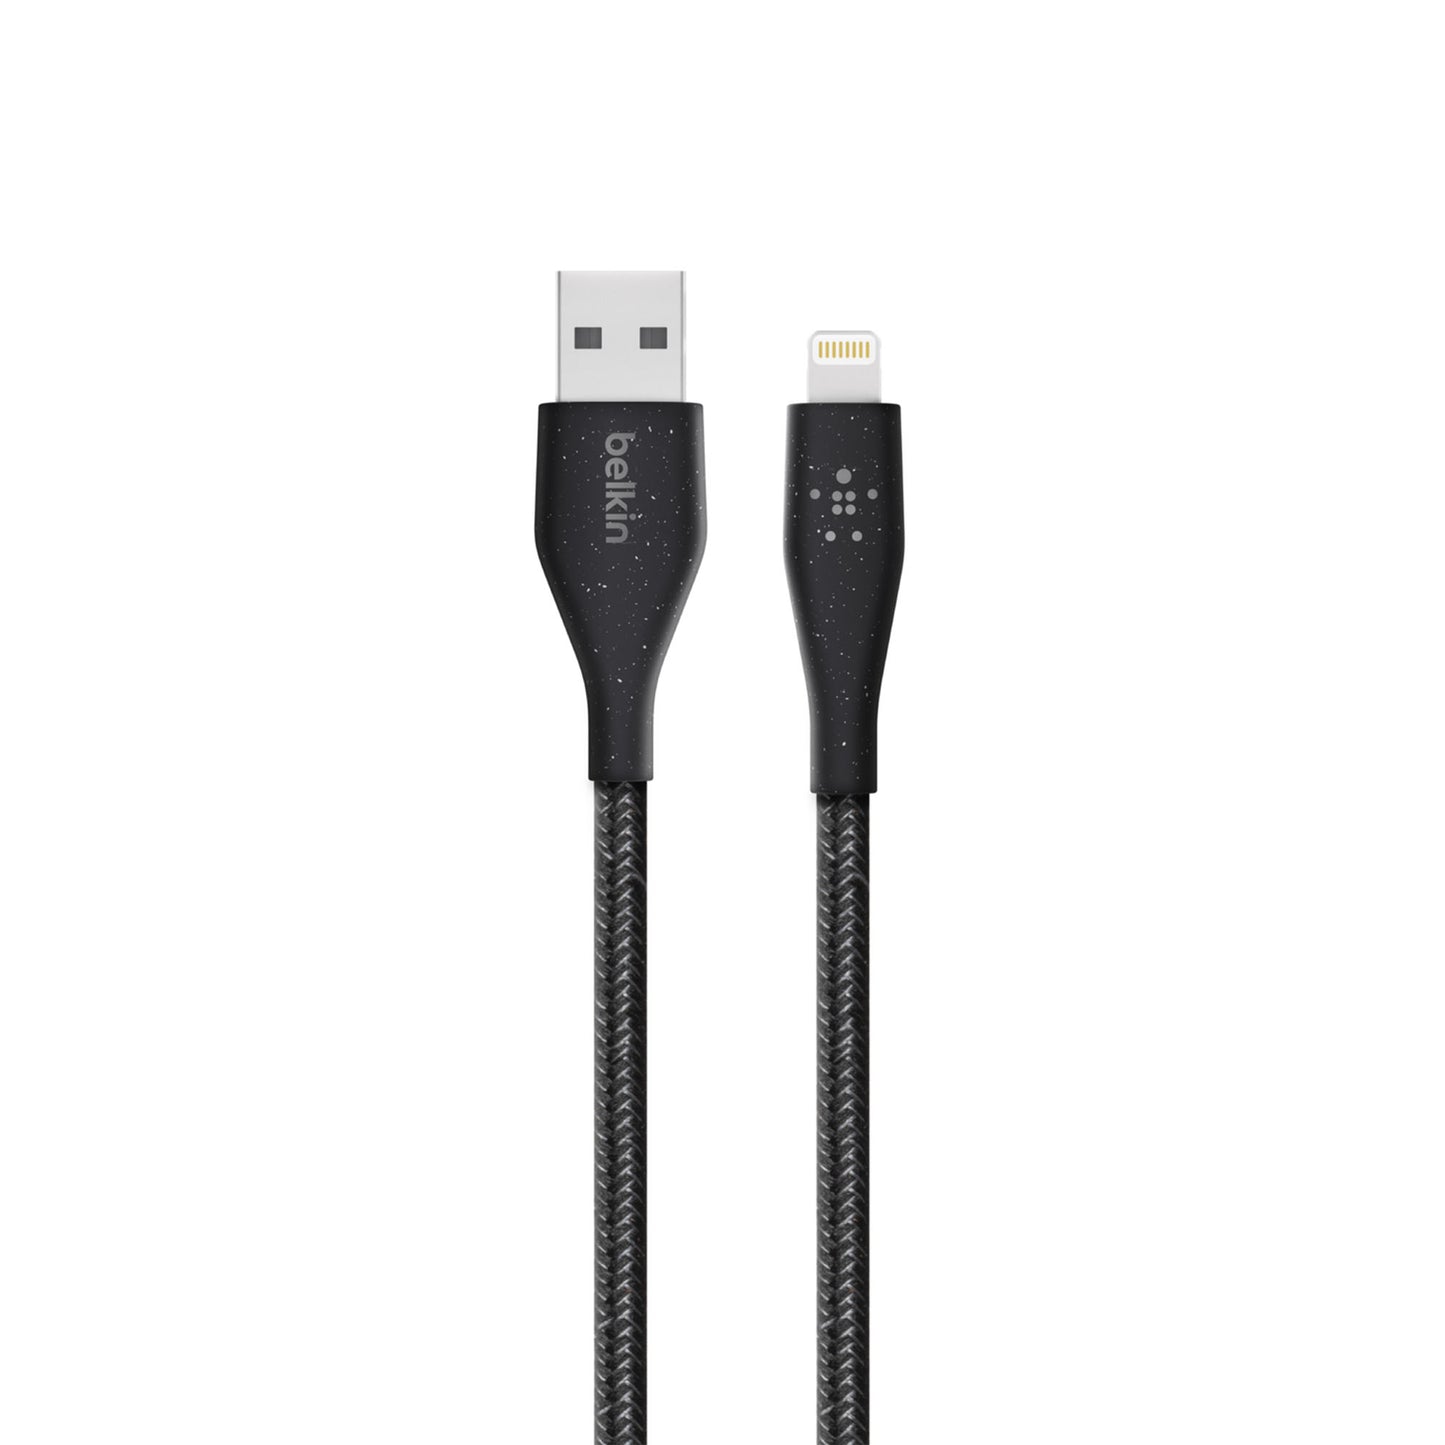 BELKIN Duratek Plus Lightning to USB-A Cable with Strap 4ft - Black